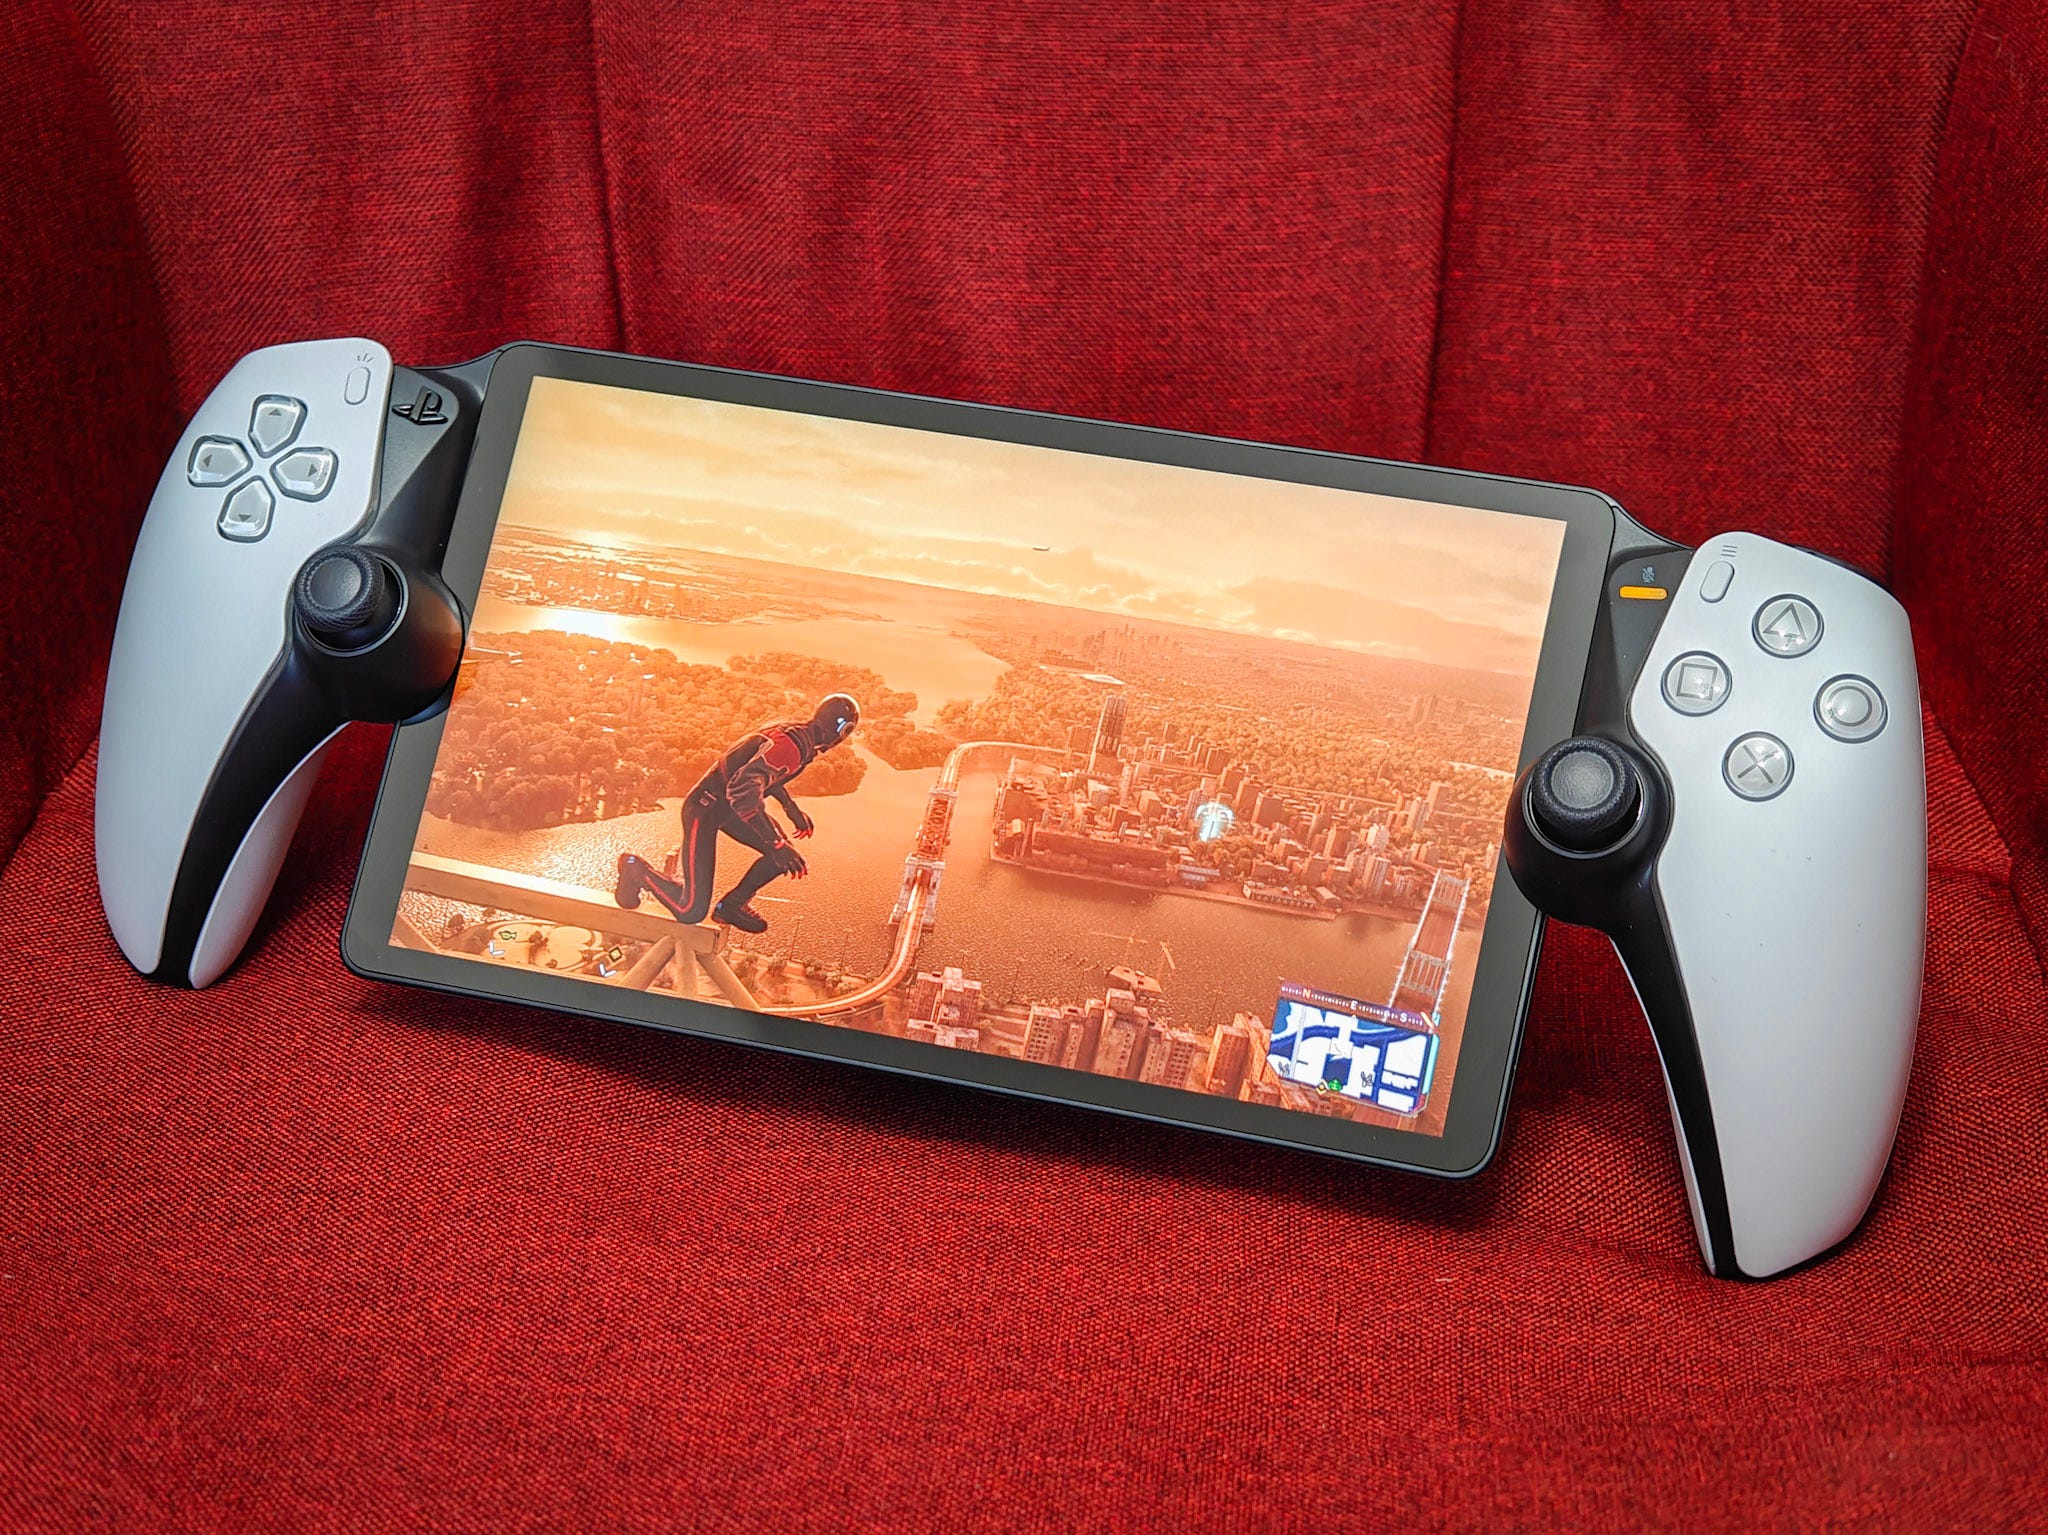 PlayStation Portal review: impressive hardware but is Remote Play itself  good enough?